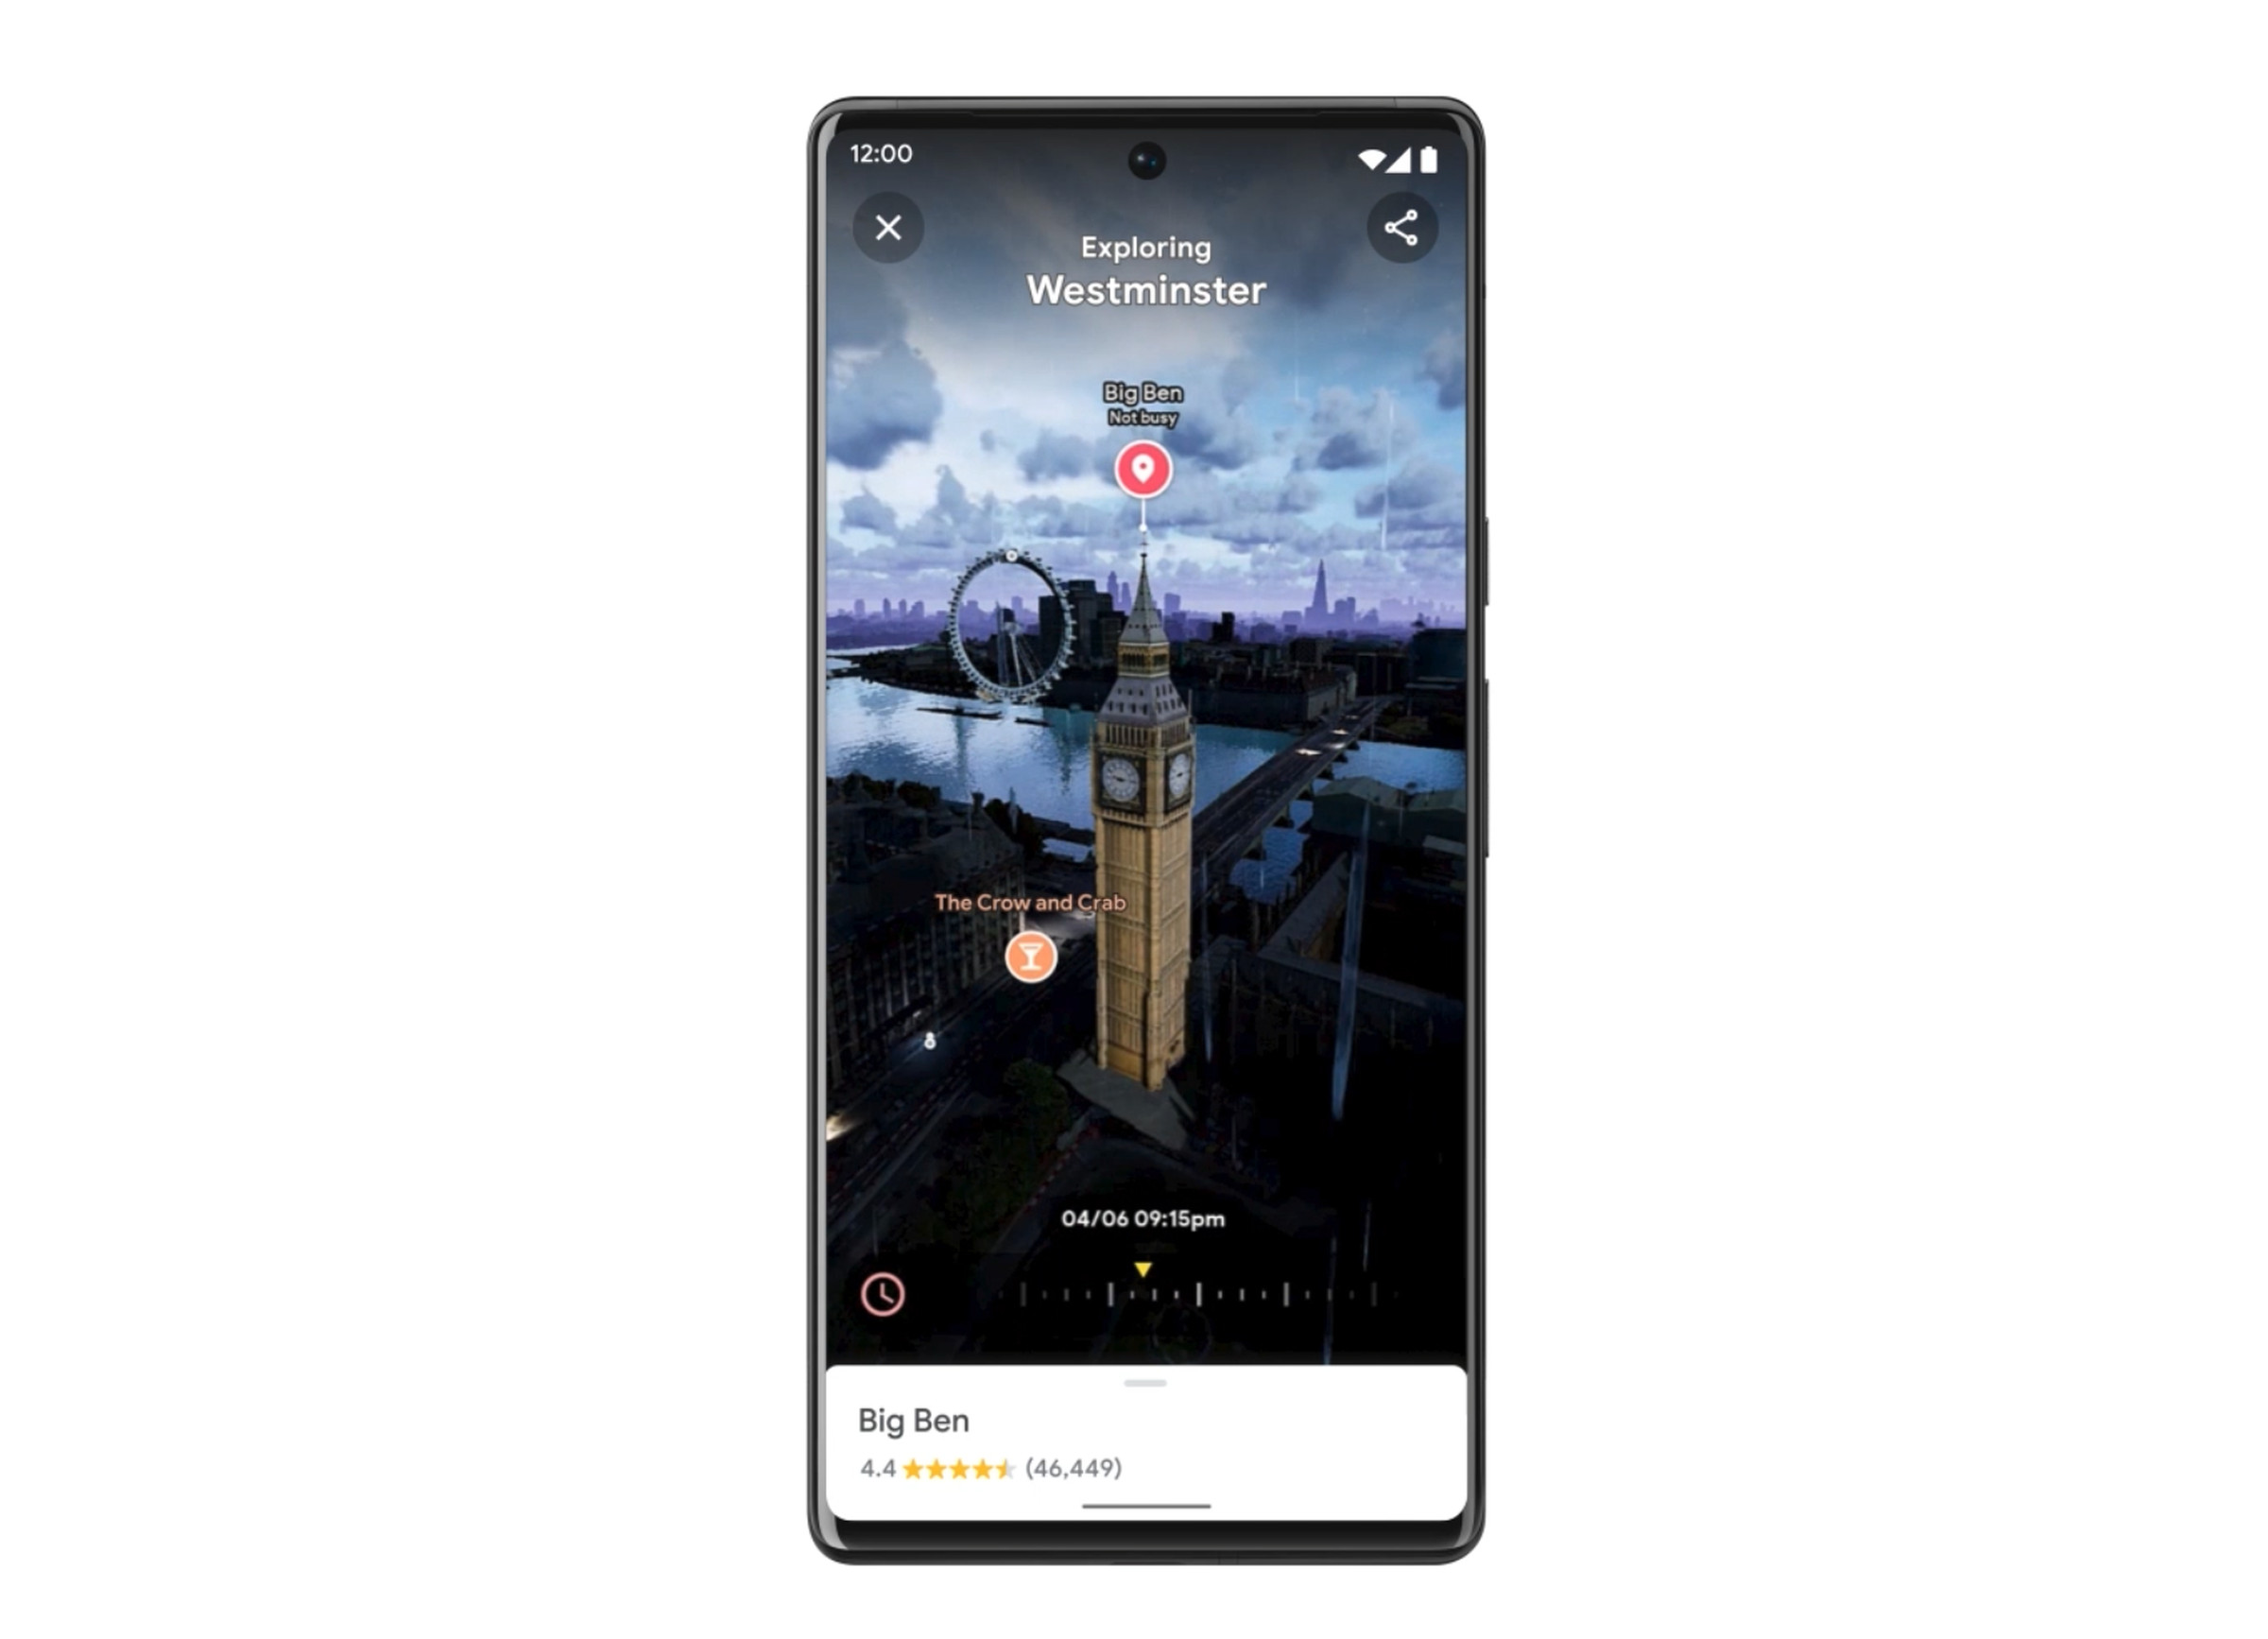 Immersive View works on most phones but only covers a few cities.